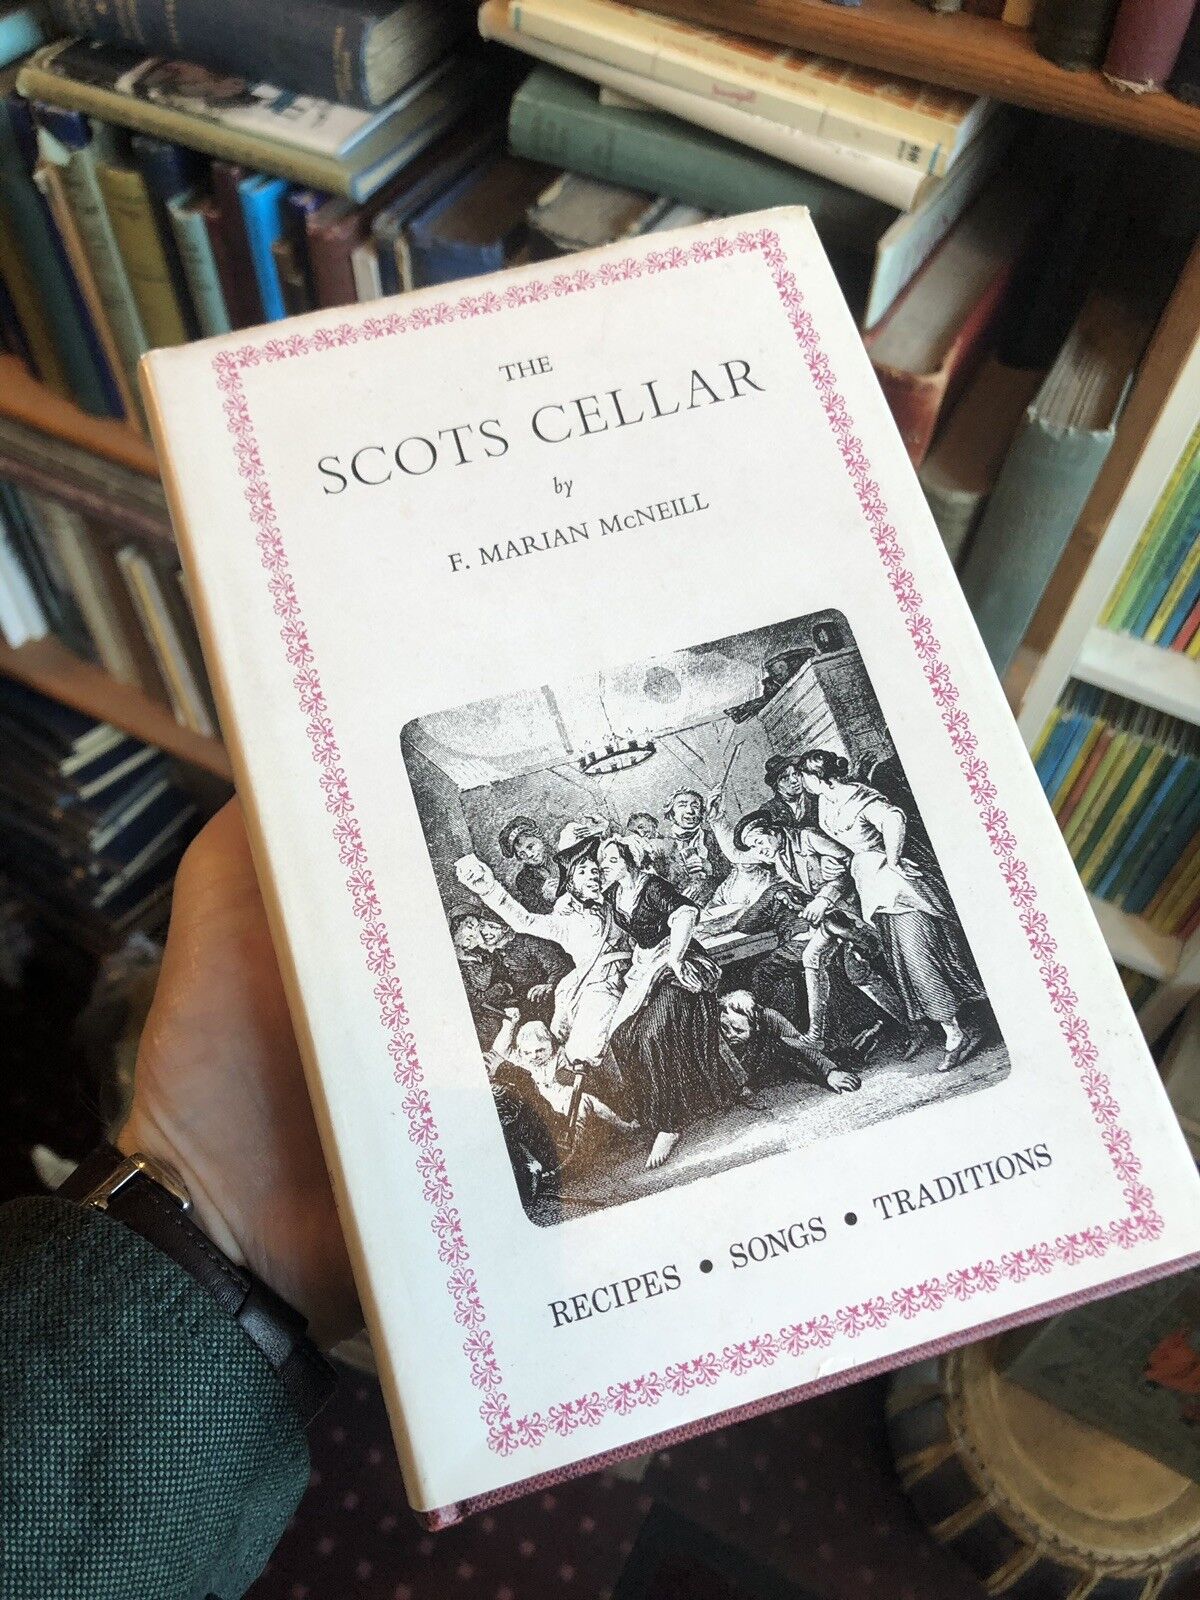 THE SCOTS CELLAR by F. Marian McNeill SCOTTISH WHISKY RECIPES Cocktails FOLKLORE